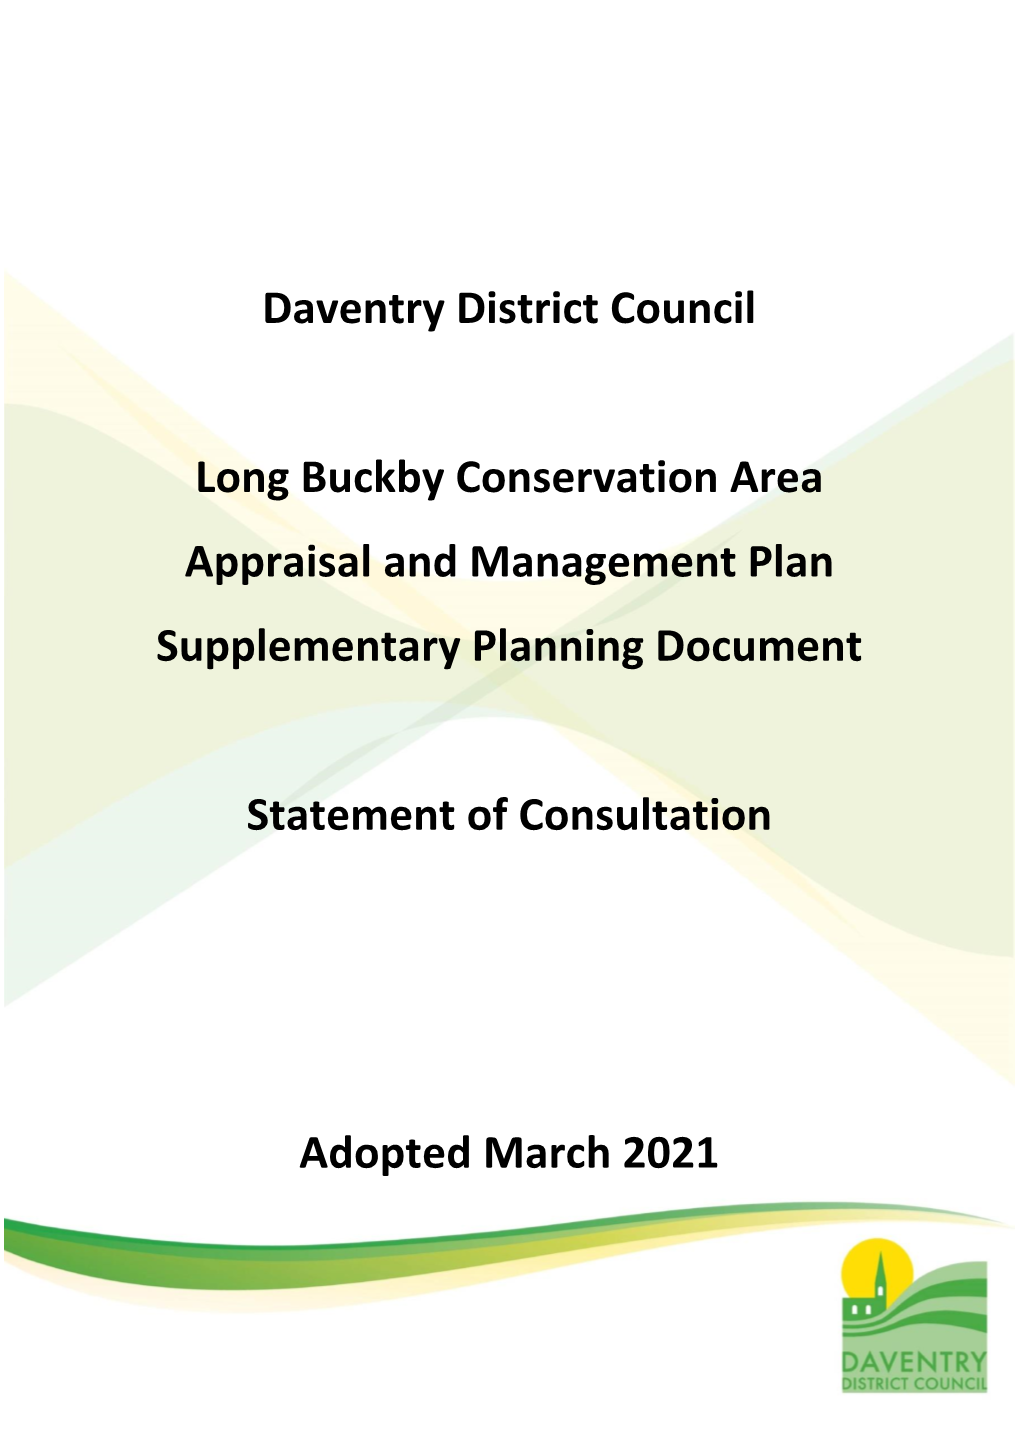 Daventry District Council Long Buckby Conservation Area Appraisal and Management Plan Supplementary Planning Document Statement